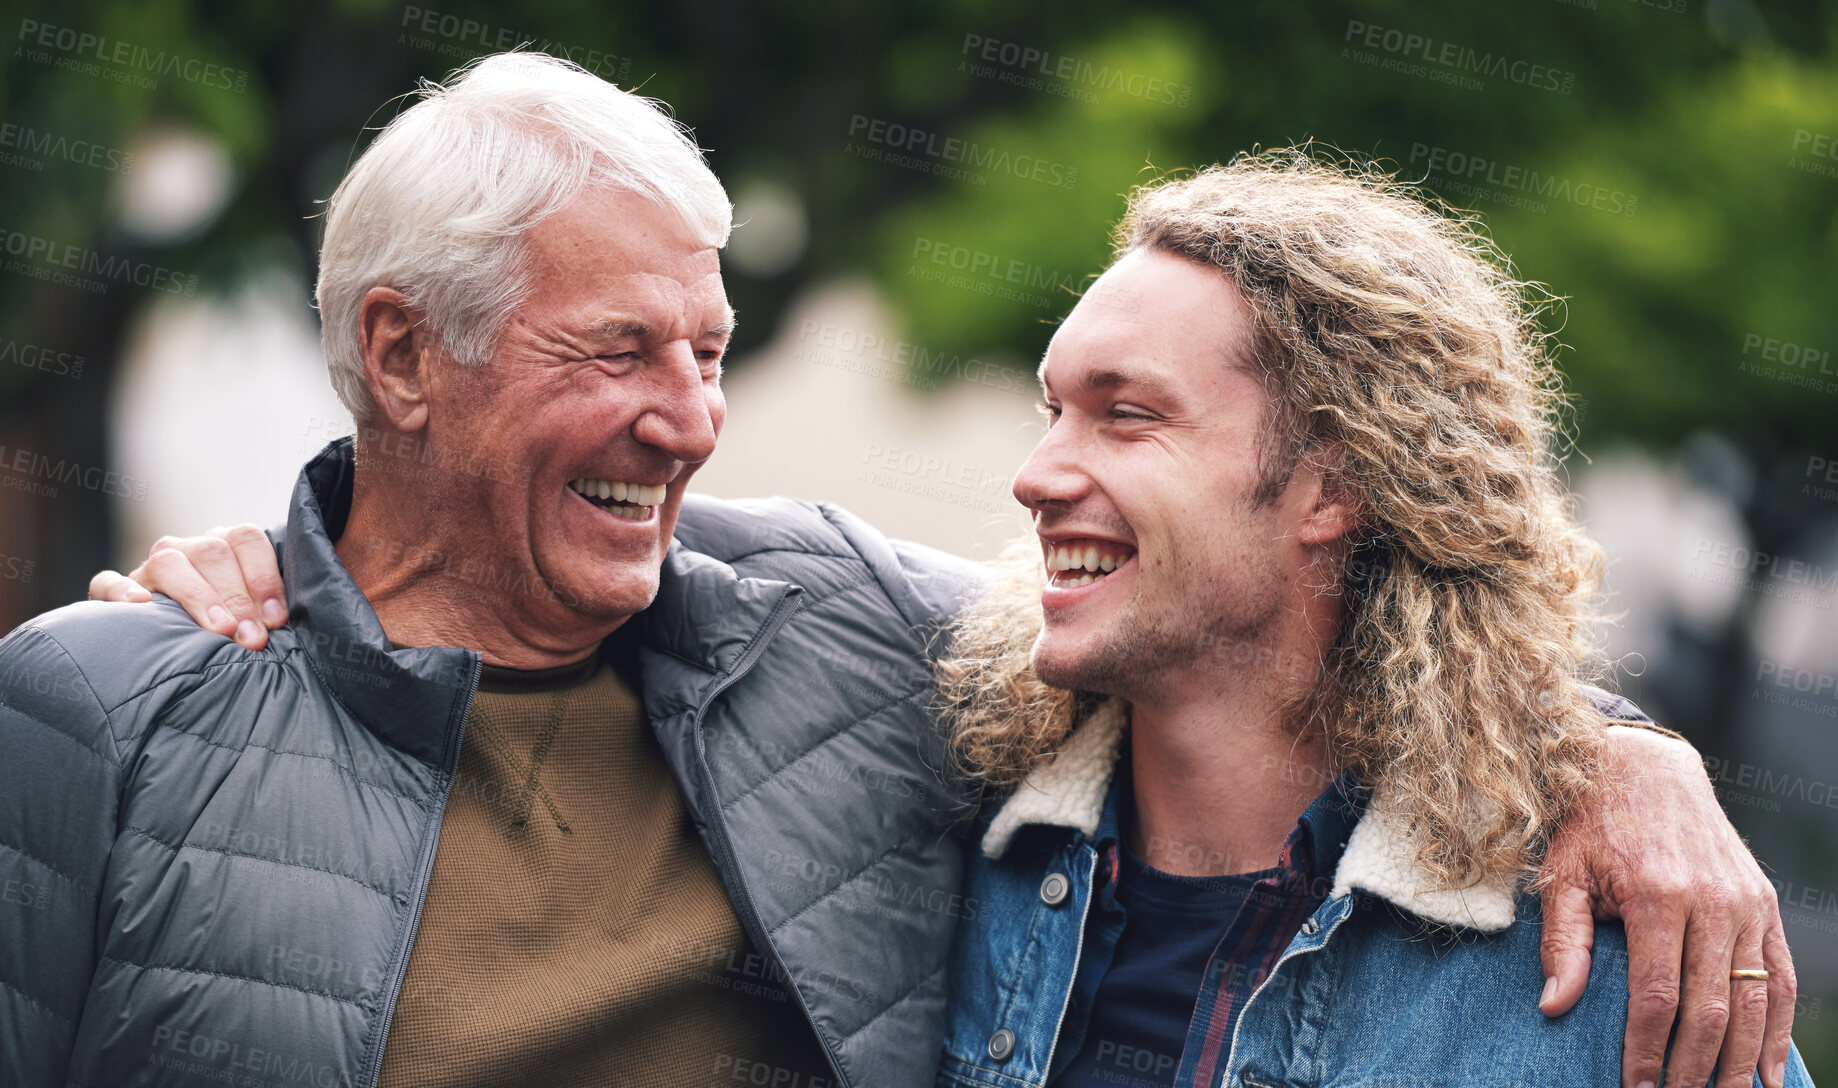 Buy stock photo A mature man hugging his young son during a day in the park. A cheerful young man relaxing in the park with his father. A senior man with his arm around his son walking through the park